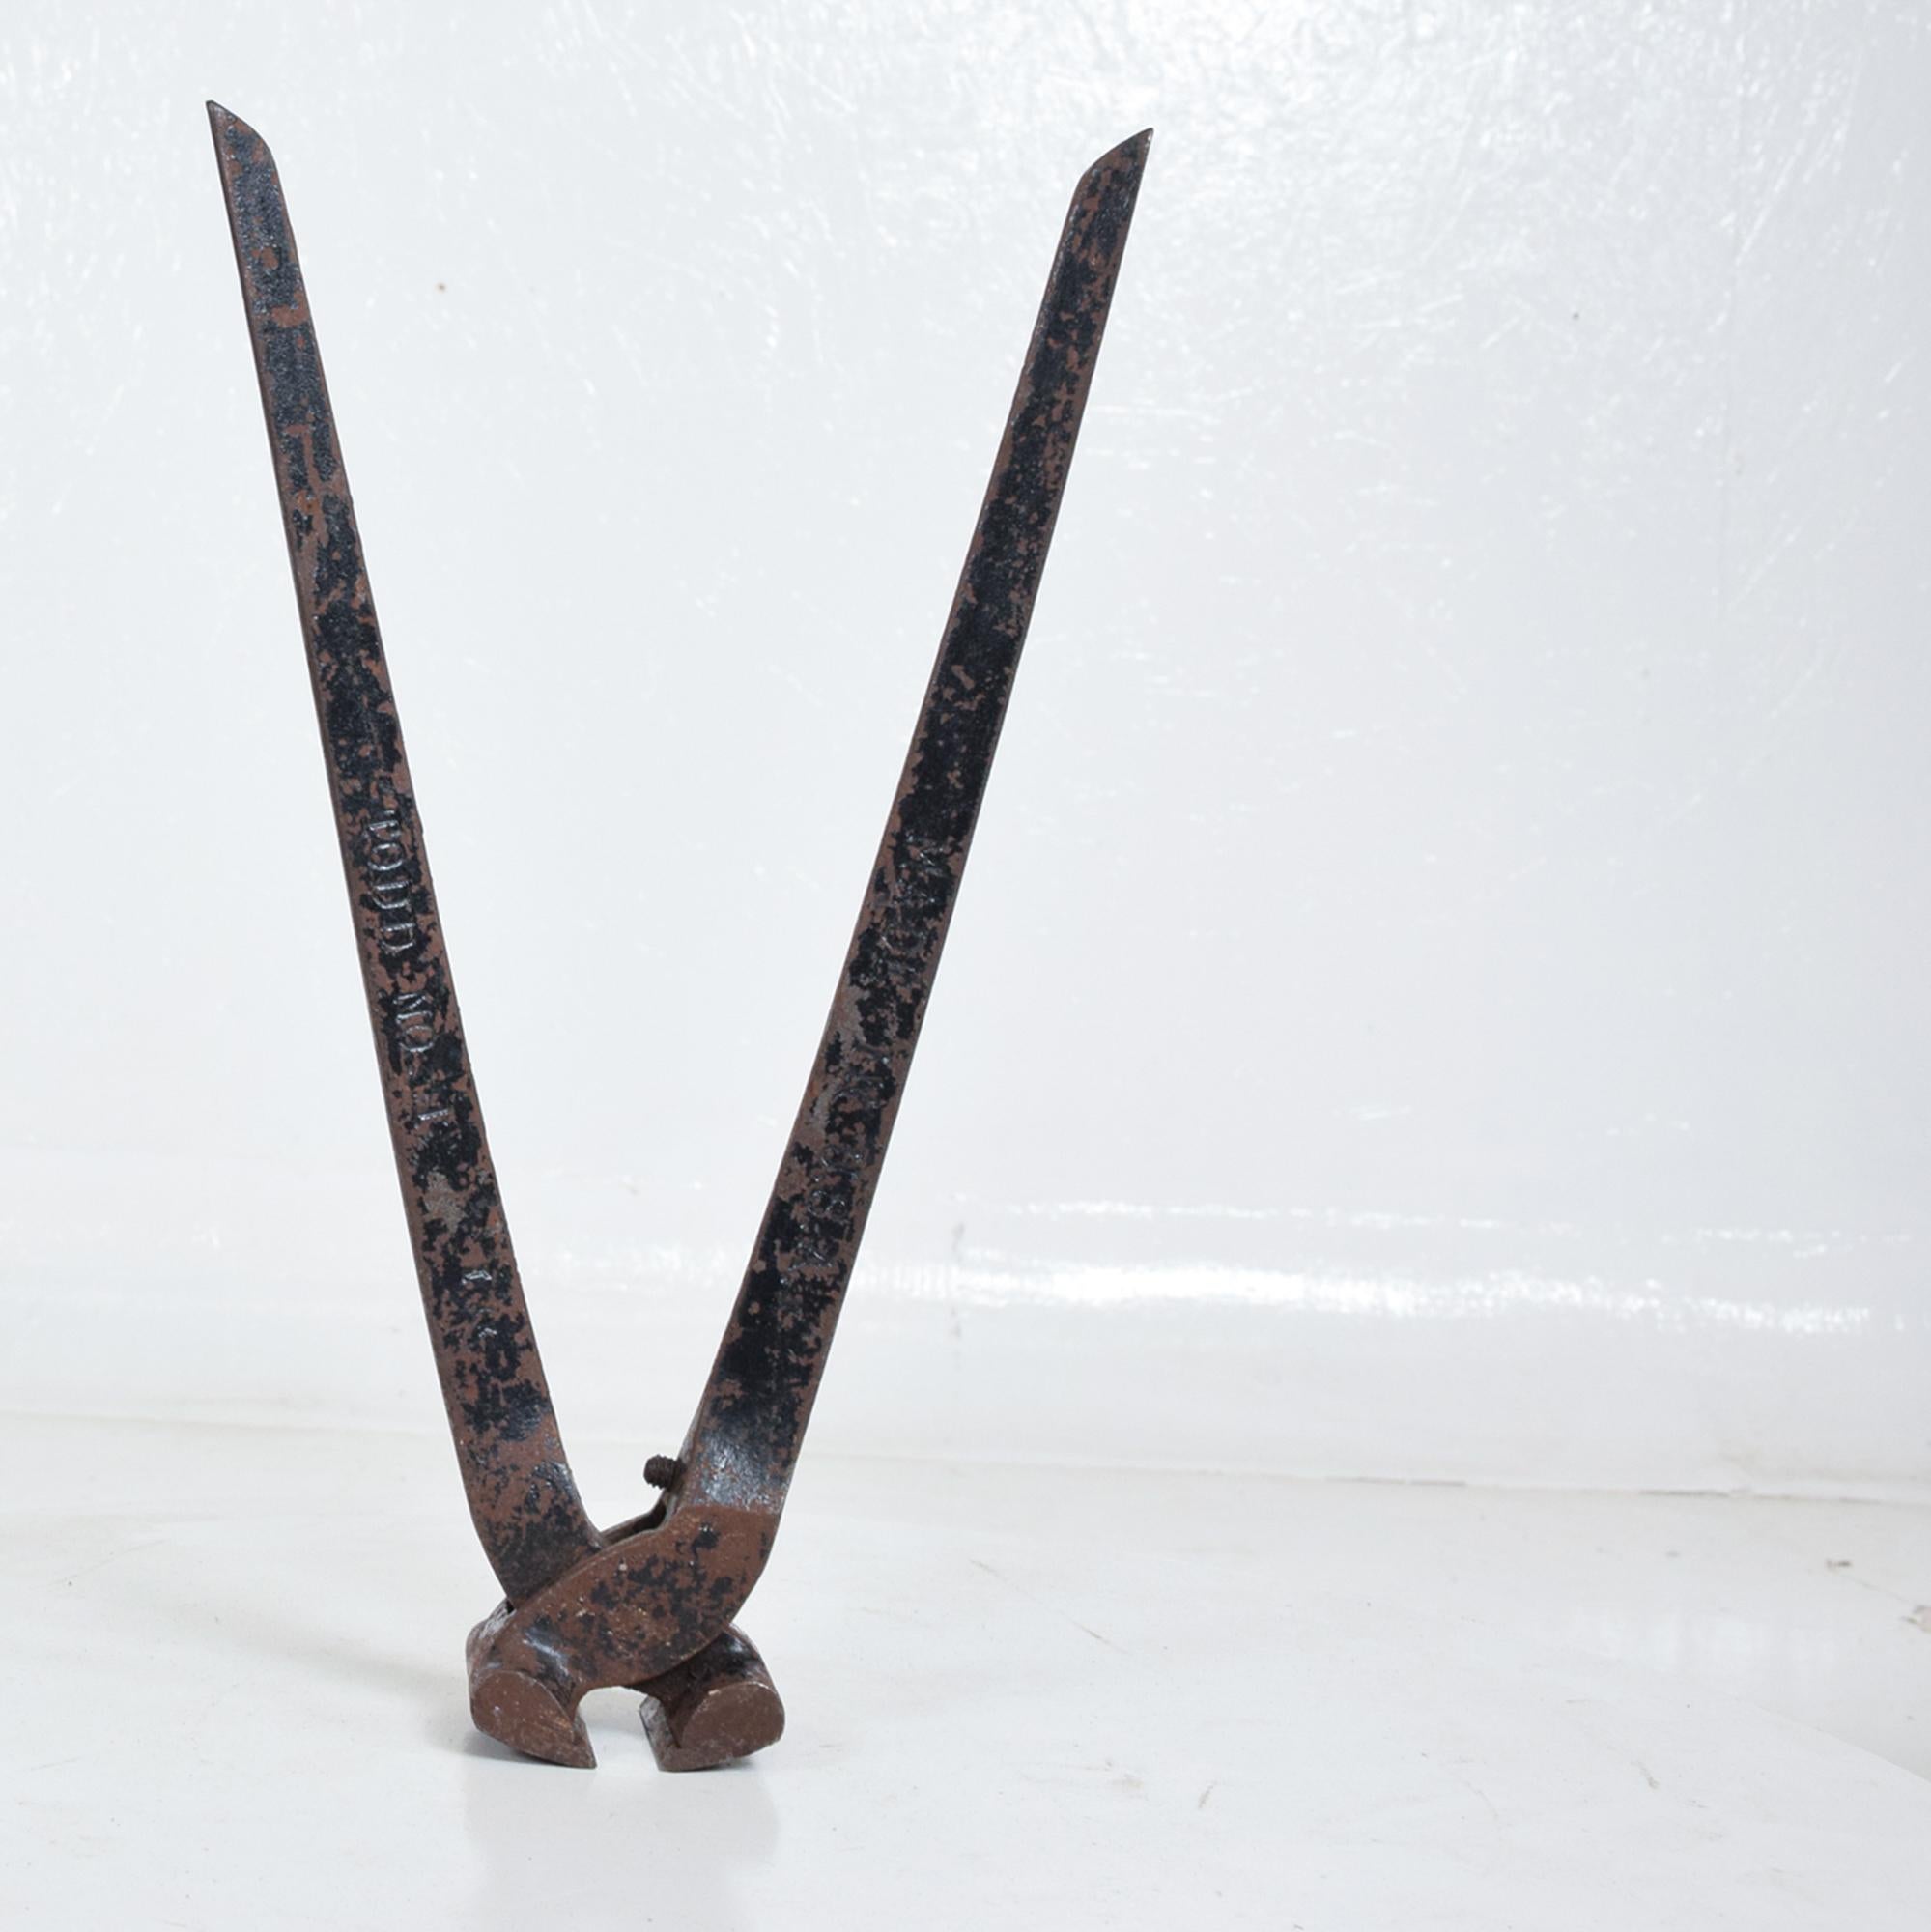 Tool
Vintage Tool Nail Pliers Pincers Pullers. Made in the USA. 1960s
Signs of vintage age and wear
Great design and form. Wonderful advertising carpentry prop.
Dimensions: 12.25 H x 1.88W x 1.75 D inches
Original Unrestored Distressed Vintage